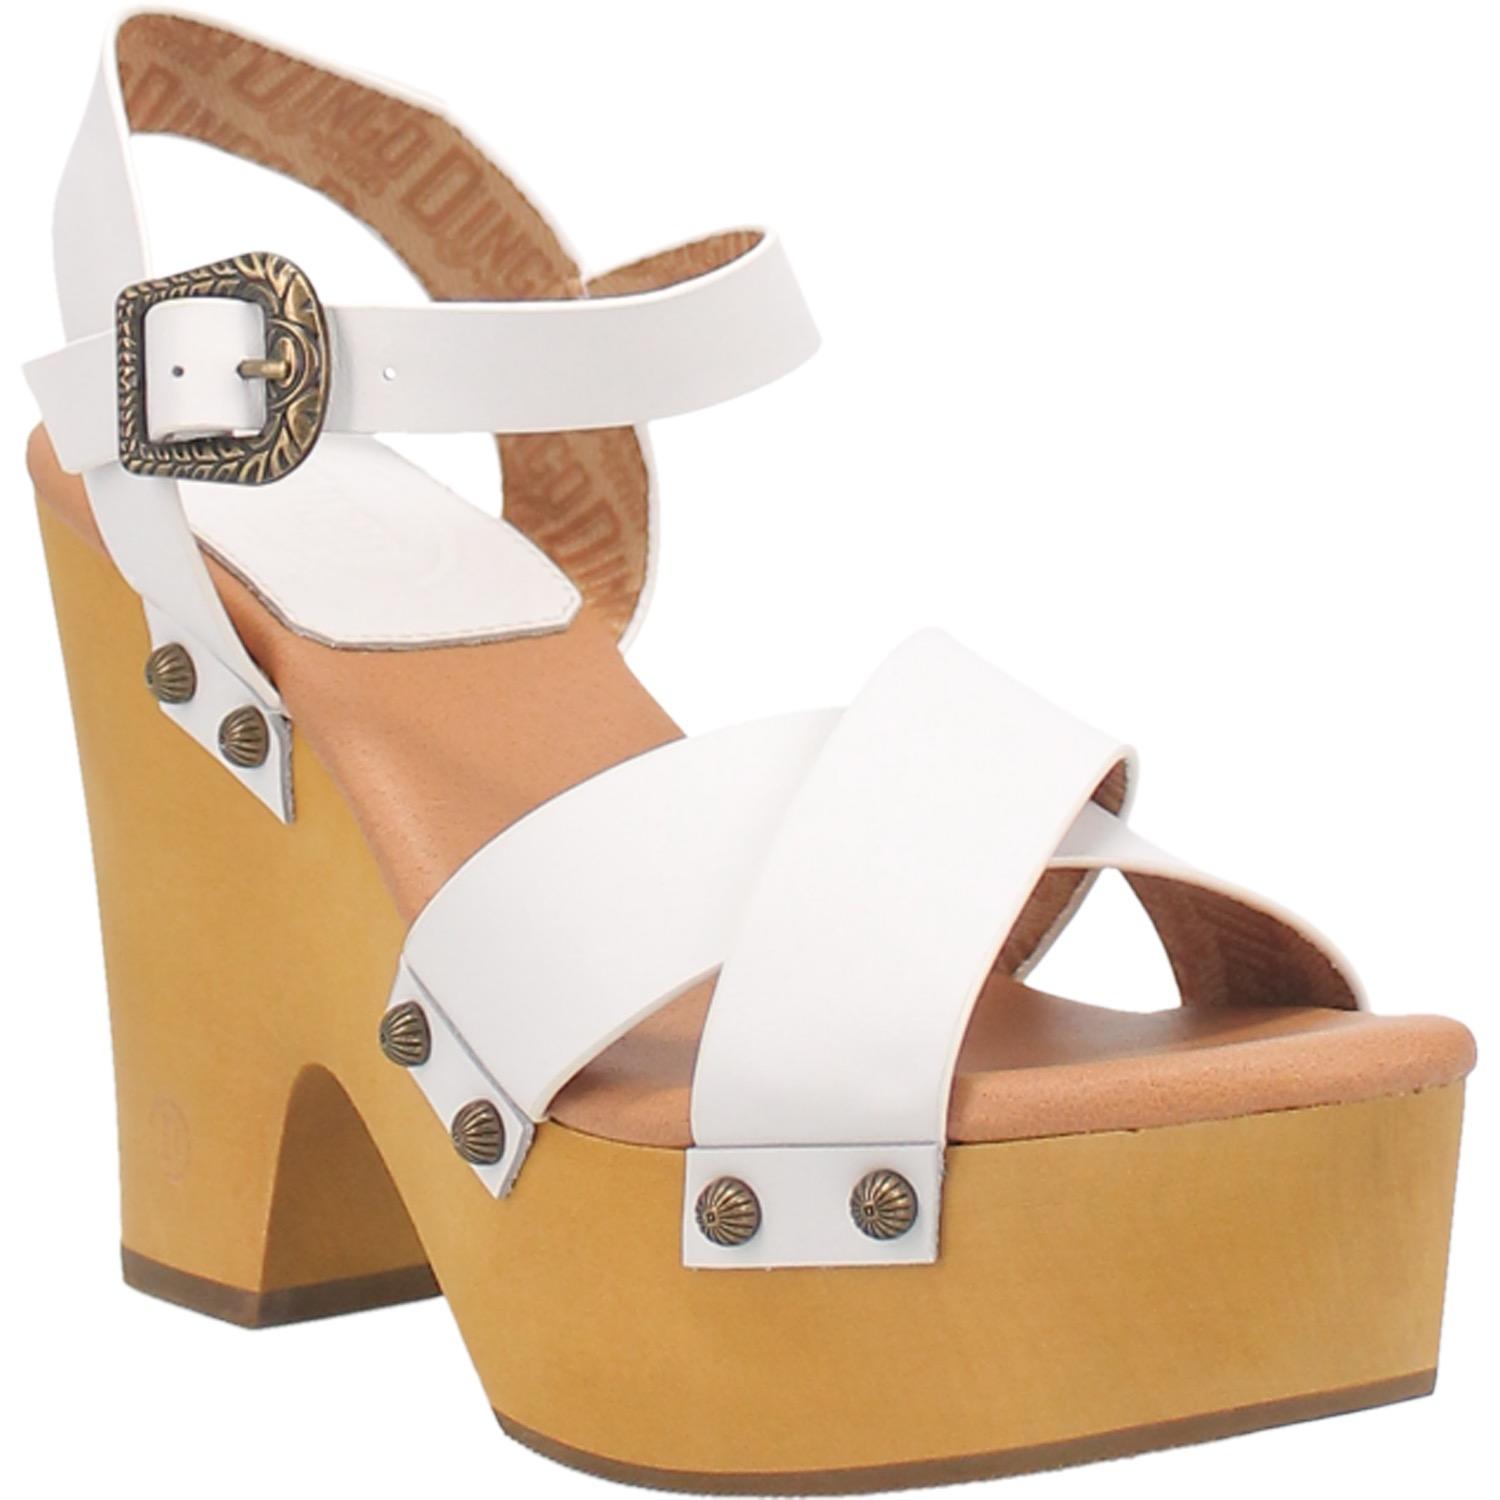 A platform high heeled white sandal with two crossed whited straps in the front, white ankle straps with a unique buckle, and circular studs. Item is pictured on a white background.